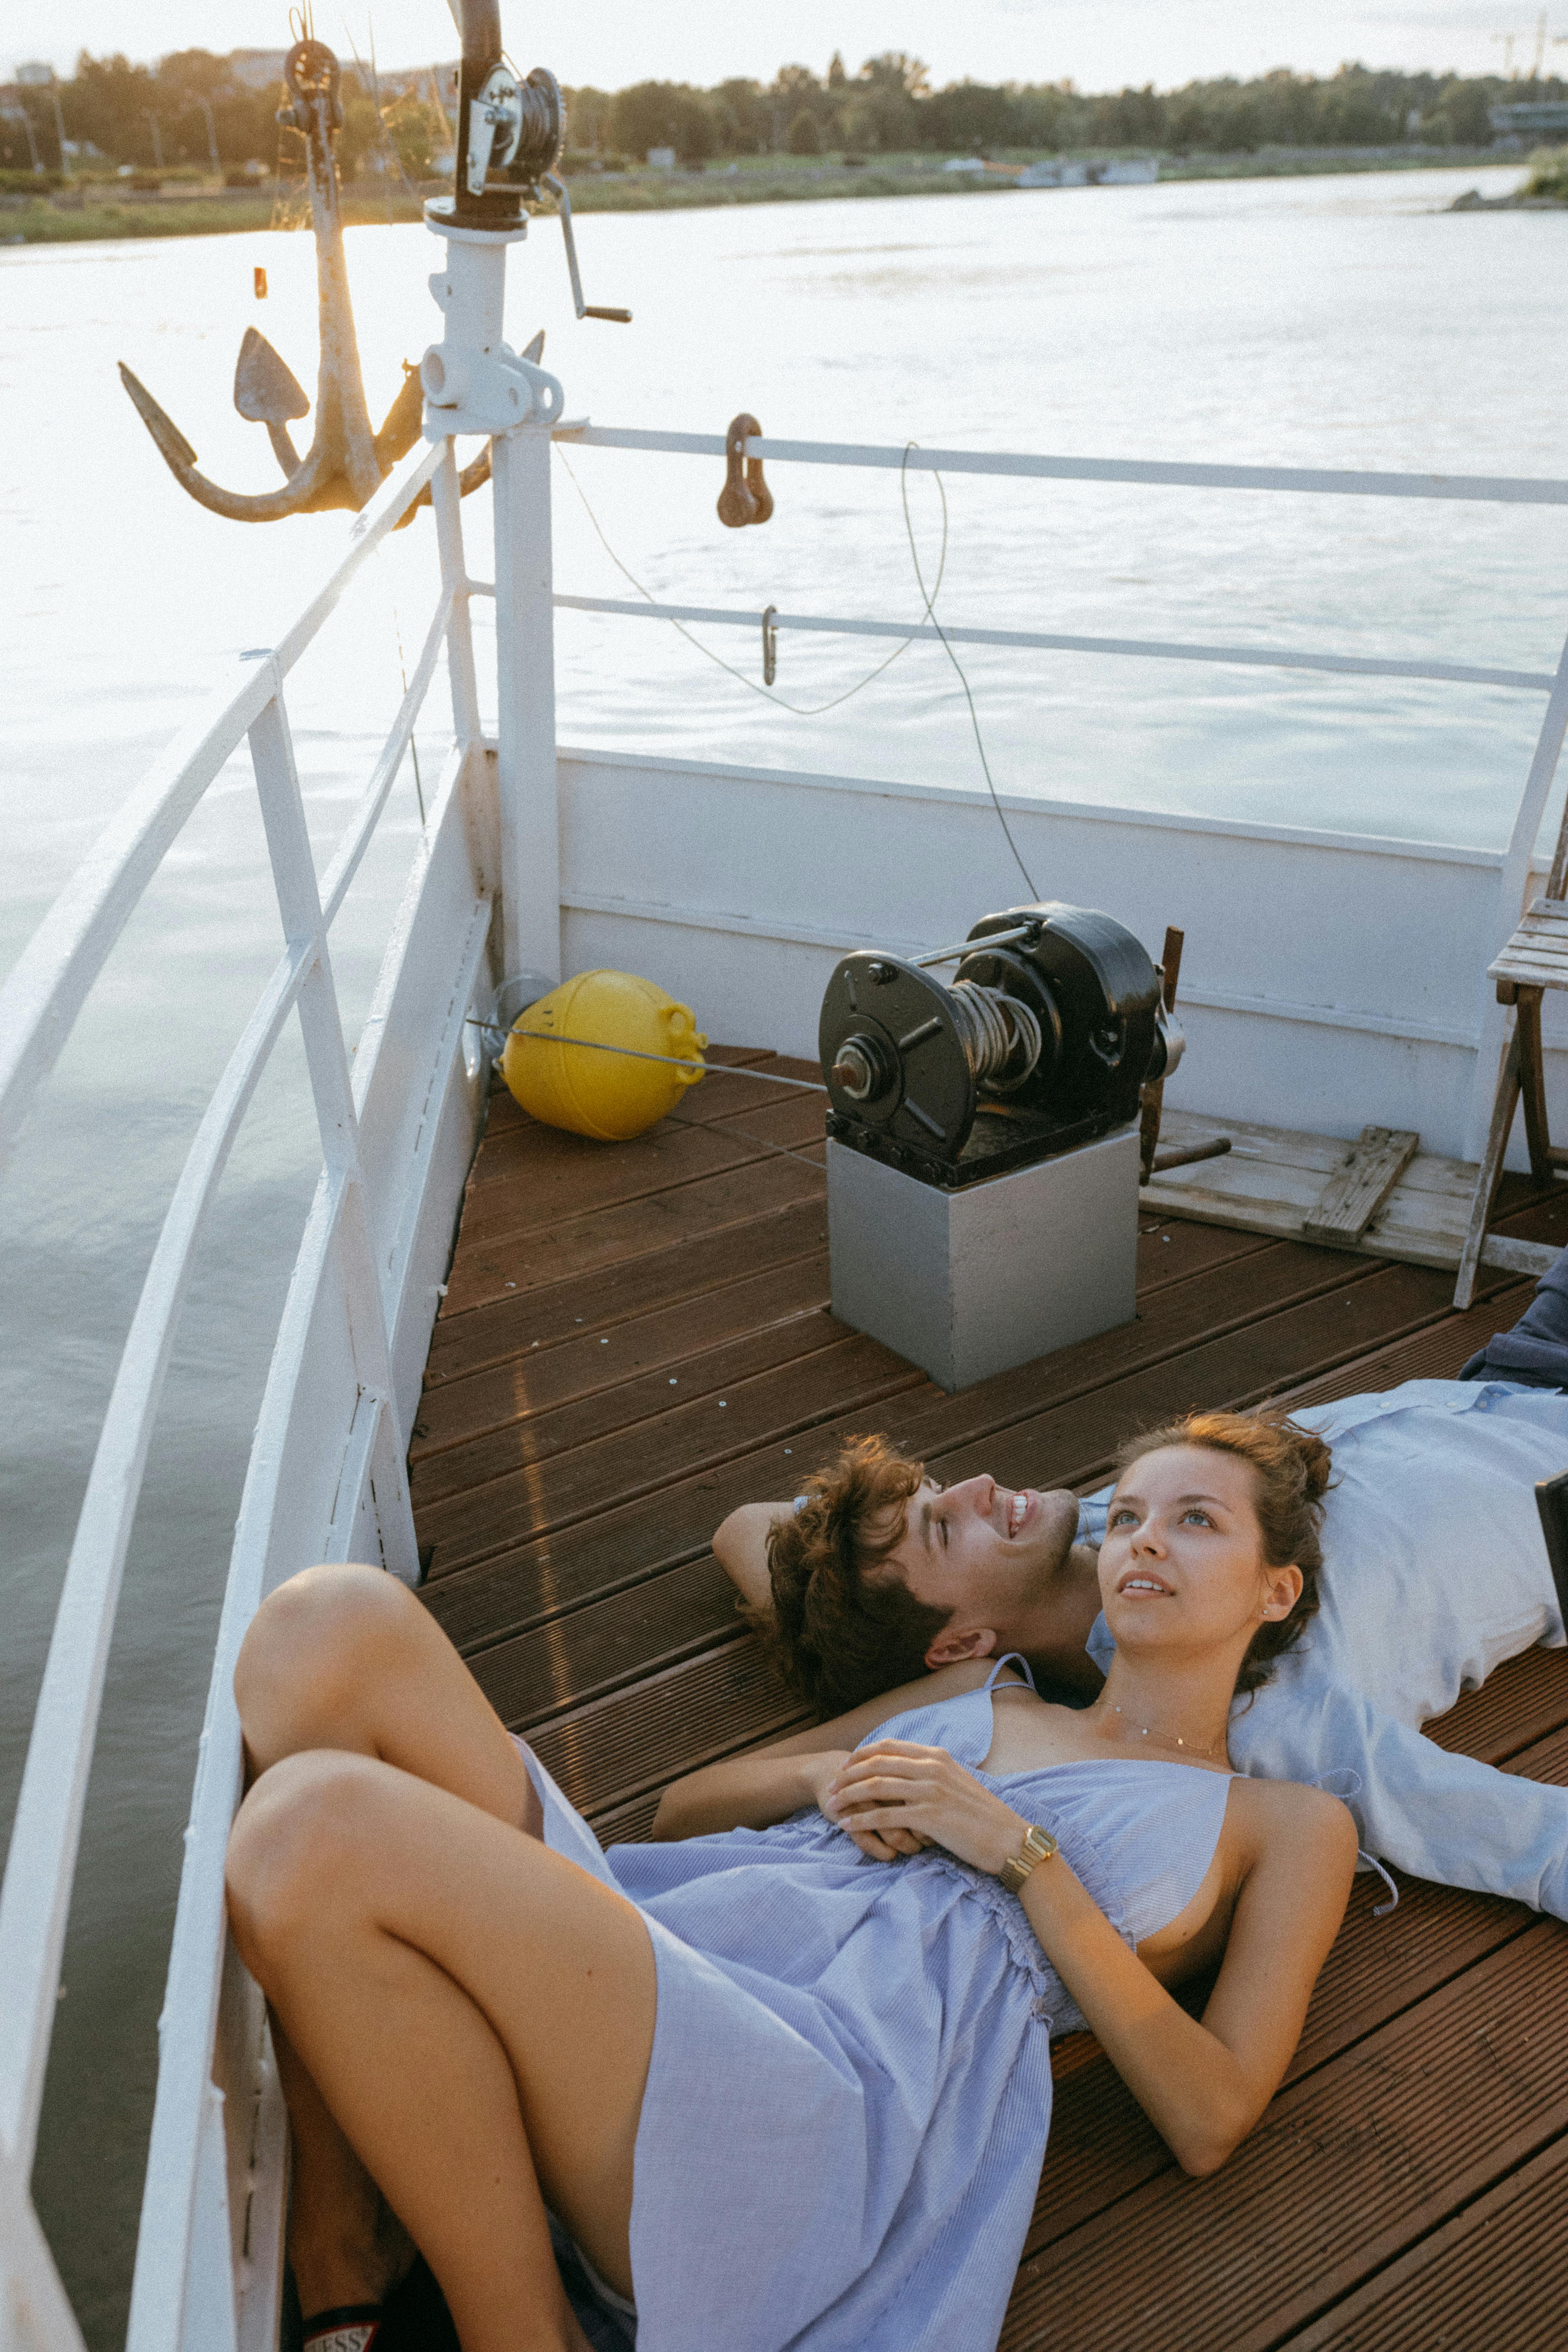 A couple on a boat cruise | Source: Pexels